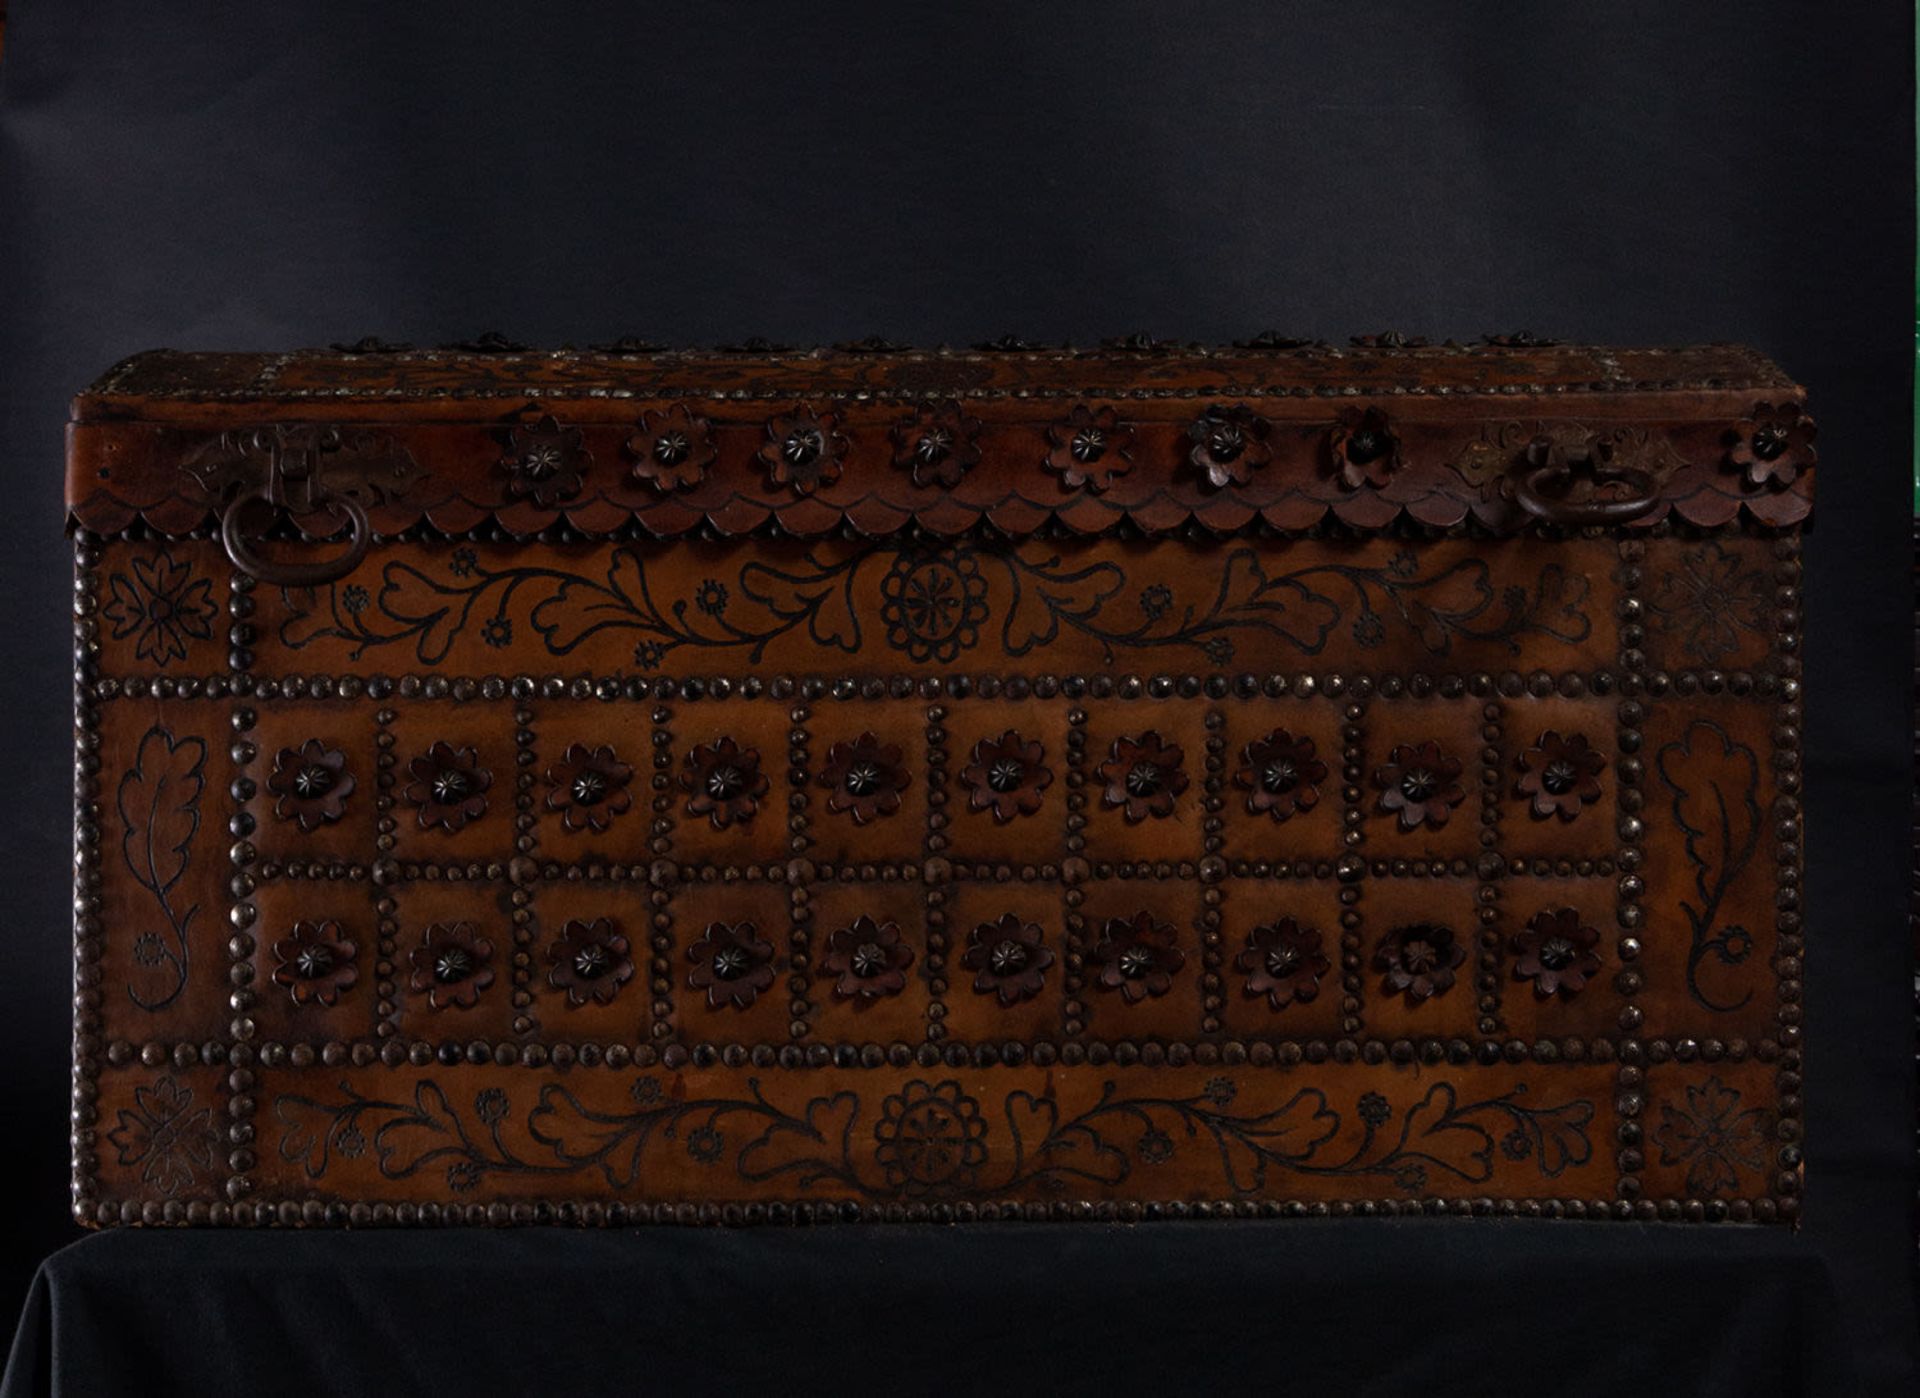 Large embossed leather chest with Floral decoration, Peru, 18th century